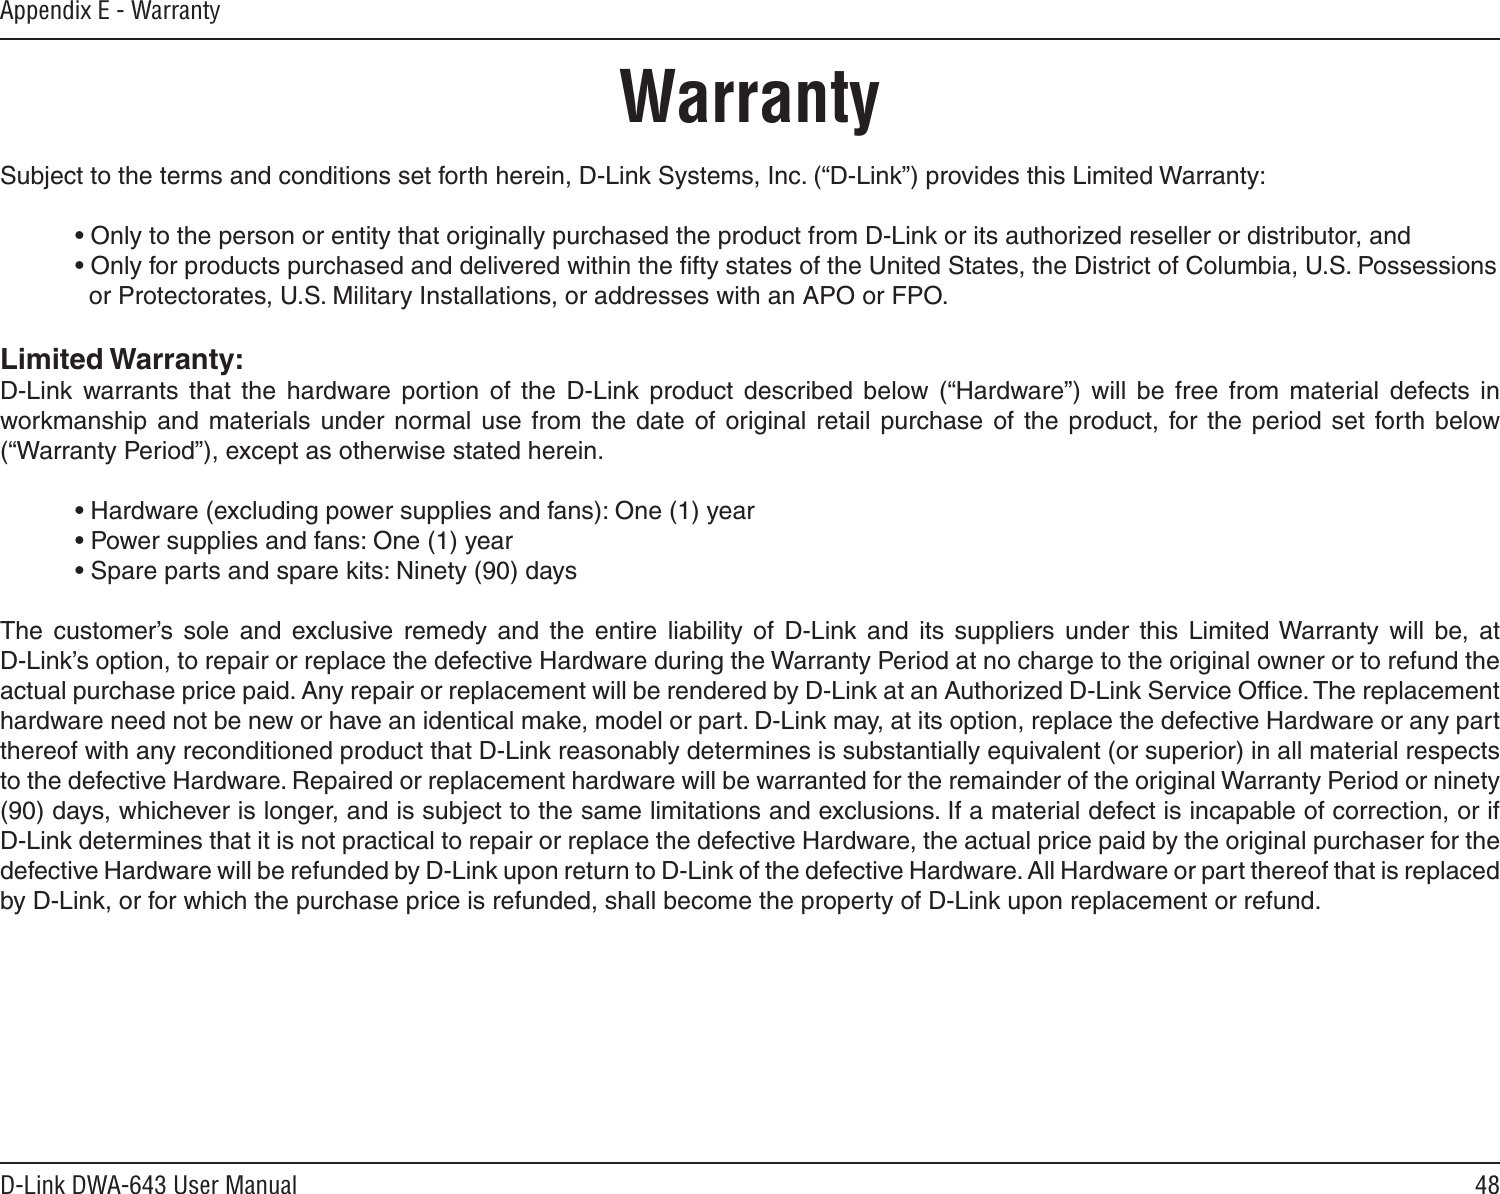 48D-Link DWA-643 User ManualAppendix E - WarrantyWarrantySubject to the terms and conditions set forth herein, D-Link Systems, Inc. (“D-Link”) provides this Limited Warranty:  • Only to the person or entity that originally purchased the product from D-Link or its authorized reseller or distributor, and  • Only for products purchased and delivered within the ﬁfty states of the United States, the District of Columbia, U.S. Possessions      or Protectorates, U.S. Military Installations, or addresses with an APO or FPO.Limited Warranty:D-Link  warrants that  the  hardware  portion  of  the  D-Link  product  described  below  (“Hardware”)  will  be  free  from  material  defects  in workmanship  and materials under  normal  use  from the  date of  original  retail purchase  of the  product,  for  the period set  forth  below (“Warranty Period”), except as otherwise stated herein.  • Hardware (excluding power supplies and fans): One (1) year  • Power supplies and fans: One (1) year  • Spare parts and spare kits: Ninety (90) daysThe  customer’s  sole  and  exclusive  remedy  and  the  entire  liability  of  D-Link  and  its  suppliers  under  this  Limited Warranty  will  be,  at  D-Link’s option, to repair or replace the defective Hardware during the Warranty Period at no charge to the original owner or to refund the actual purchase price paid. Any repair or replacement will be rendered by D-Link at an Authorized D-Link Service Ofﬁce. The replacement hardware need not be new or have an identical make, model or part. D-Link may, at its option, replace the defective Hardware or any part thereof with any reconditioned product that D-Link reasonably determines is substantially equivalent (or superior) in all material respects to the defective Hardware. Repaired or replacement hardware will be warranted for the remainder of the original Warranty Period or ninety (90) days, whichever is longer, and is subject to the same limitations and exclusions. If a material defect is incapable of correction, or if D-Link determines that it is not practical to repair or replace the defective Hardware, the actual price paid by the original purchaser for the defective Hardware will be refunded by D-Link upon return to D-Link of the defective Hardware. All Hardware or part thereof that is replaced by D-Link, or for which the purchase price is refunded, shall become the property of D-Link upon replacement or refund.